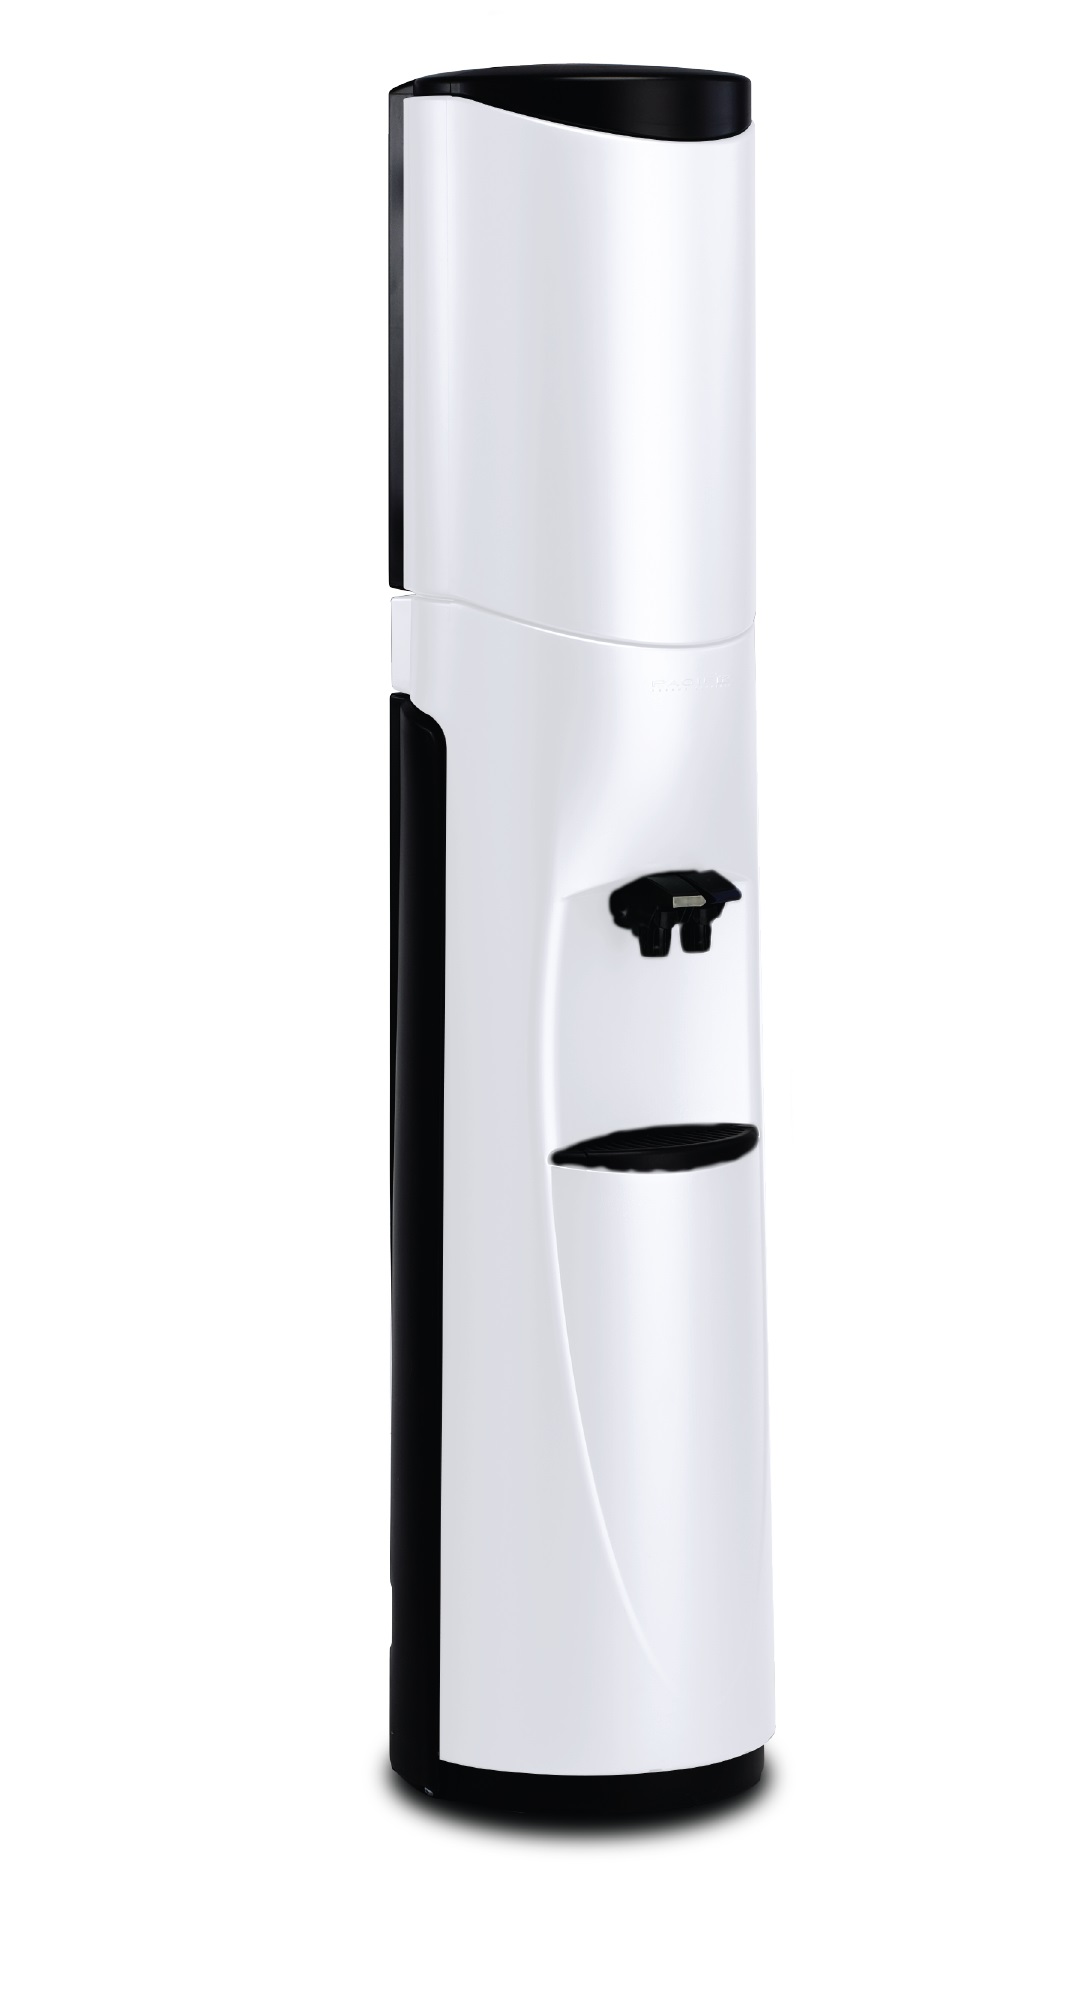 Pacifik Water Cooler - White with Black Trim - New technology for a whole new kind of bottled water cooler, Room Temperature & Cold